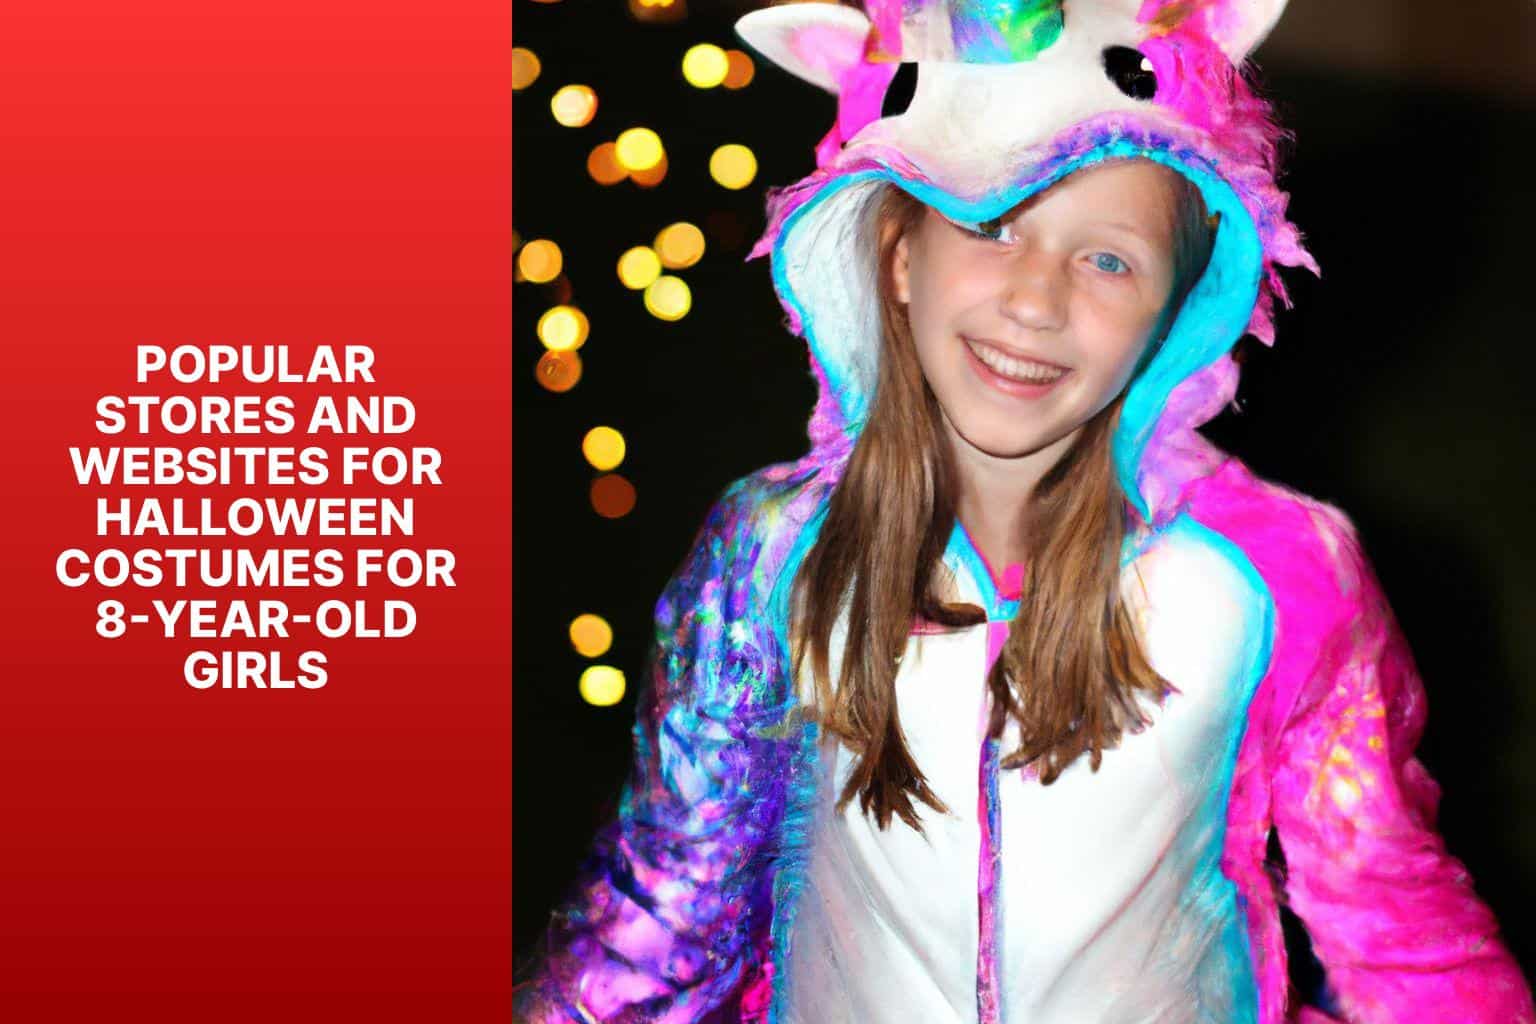 Popular Stores and Websites for Halloween Costumes for 8-Year-Old Girls - halloween costumes for 8 year olds girl 